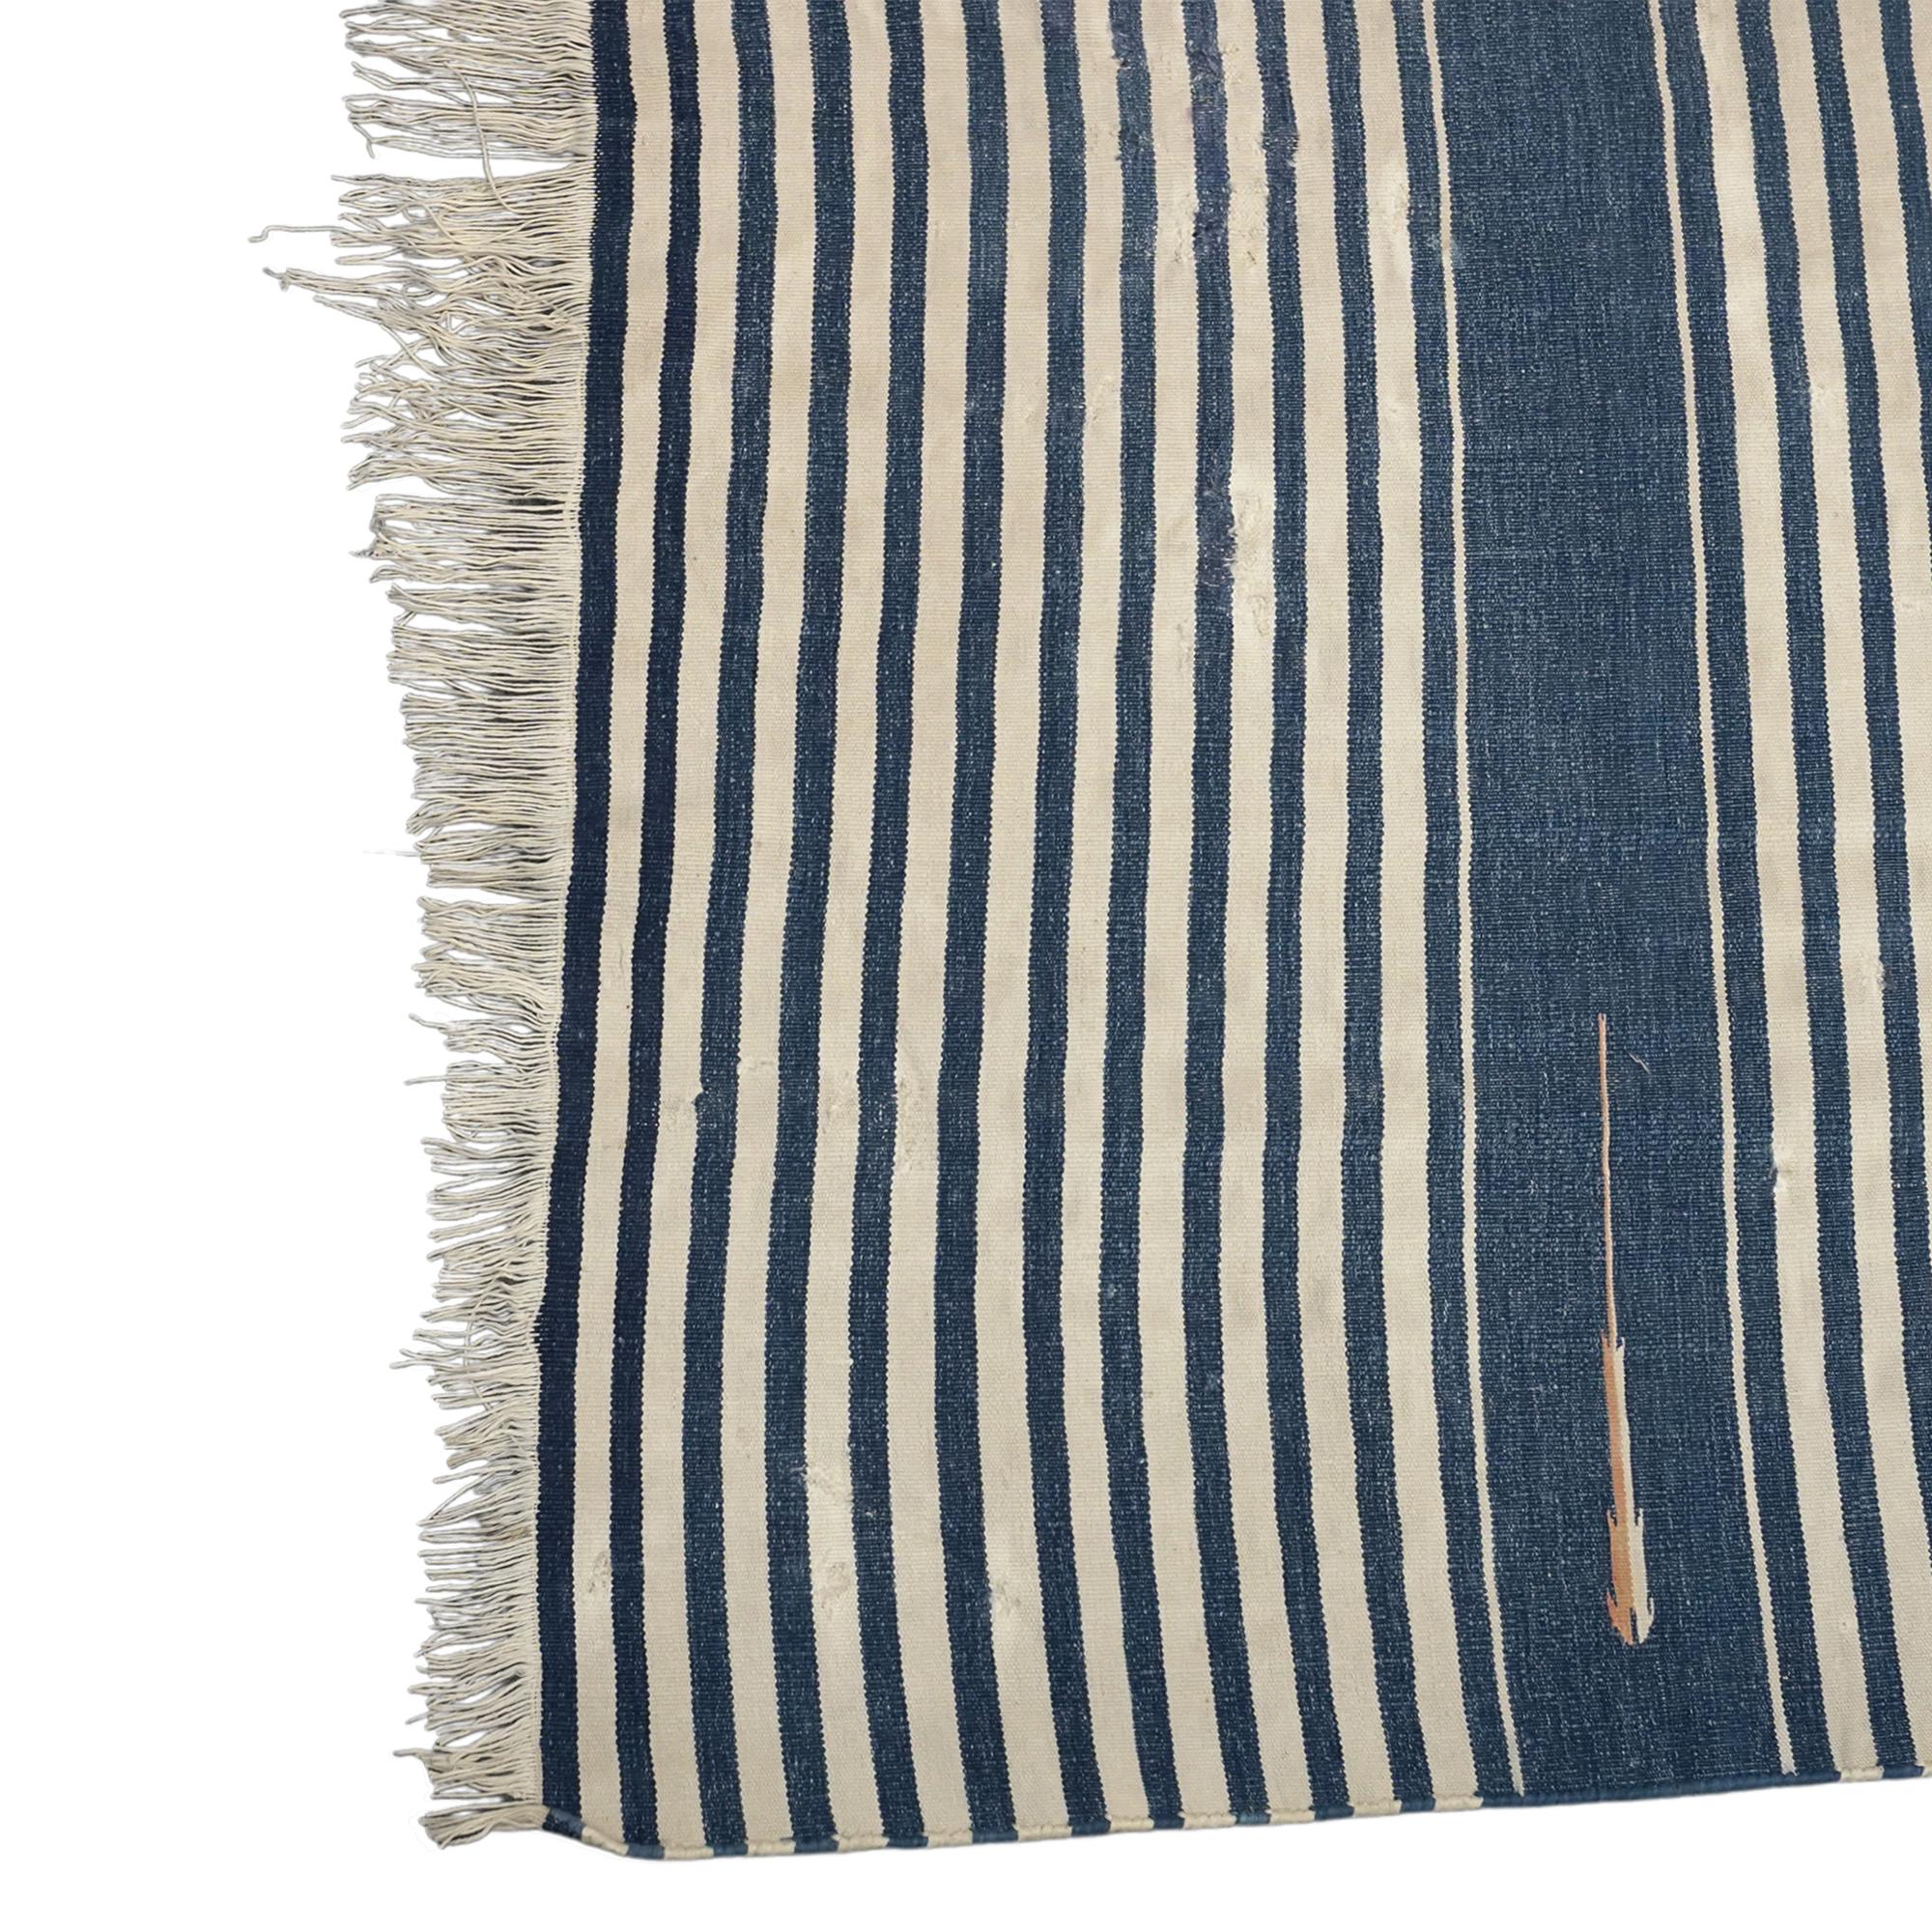 Vintage Dhurrie Runner Rug with Stripes, from Rug & Kilim In Good Condition For Sale In Long Island City, NY